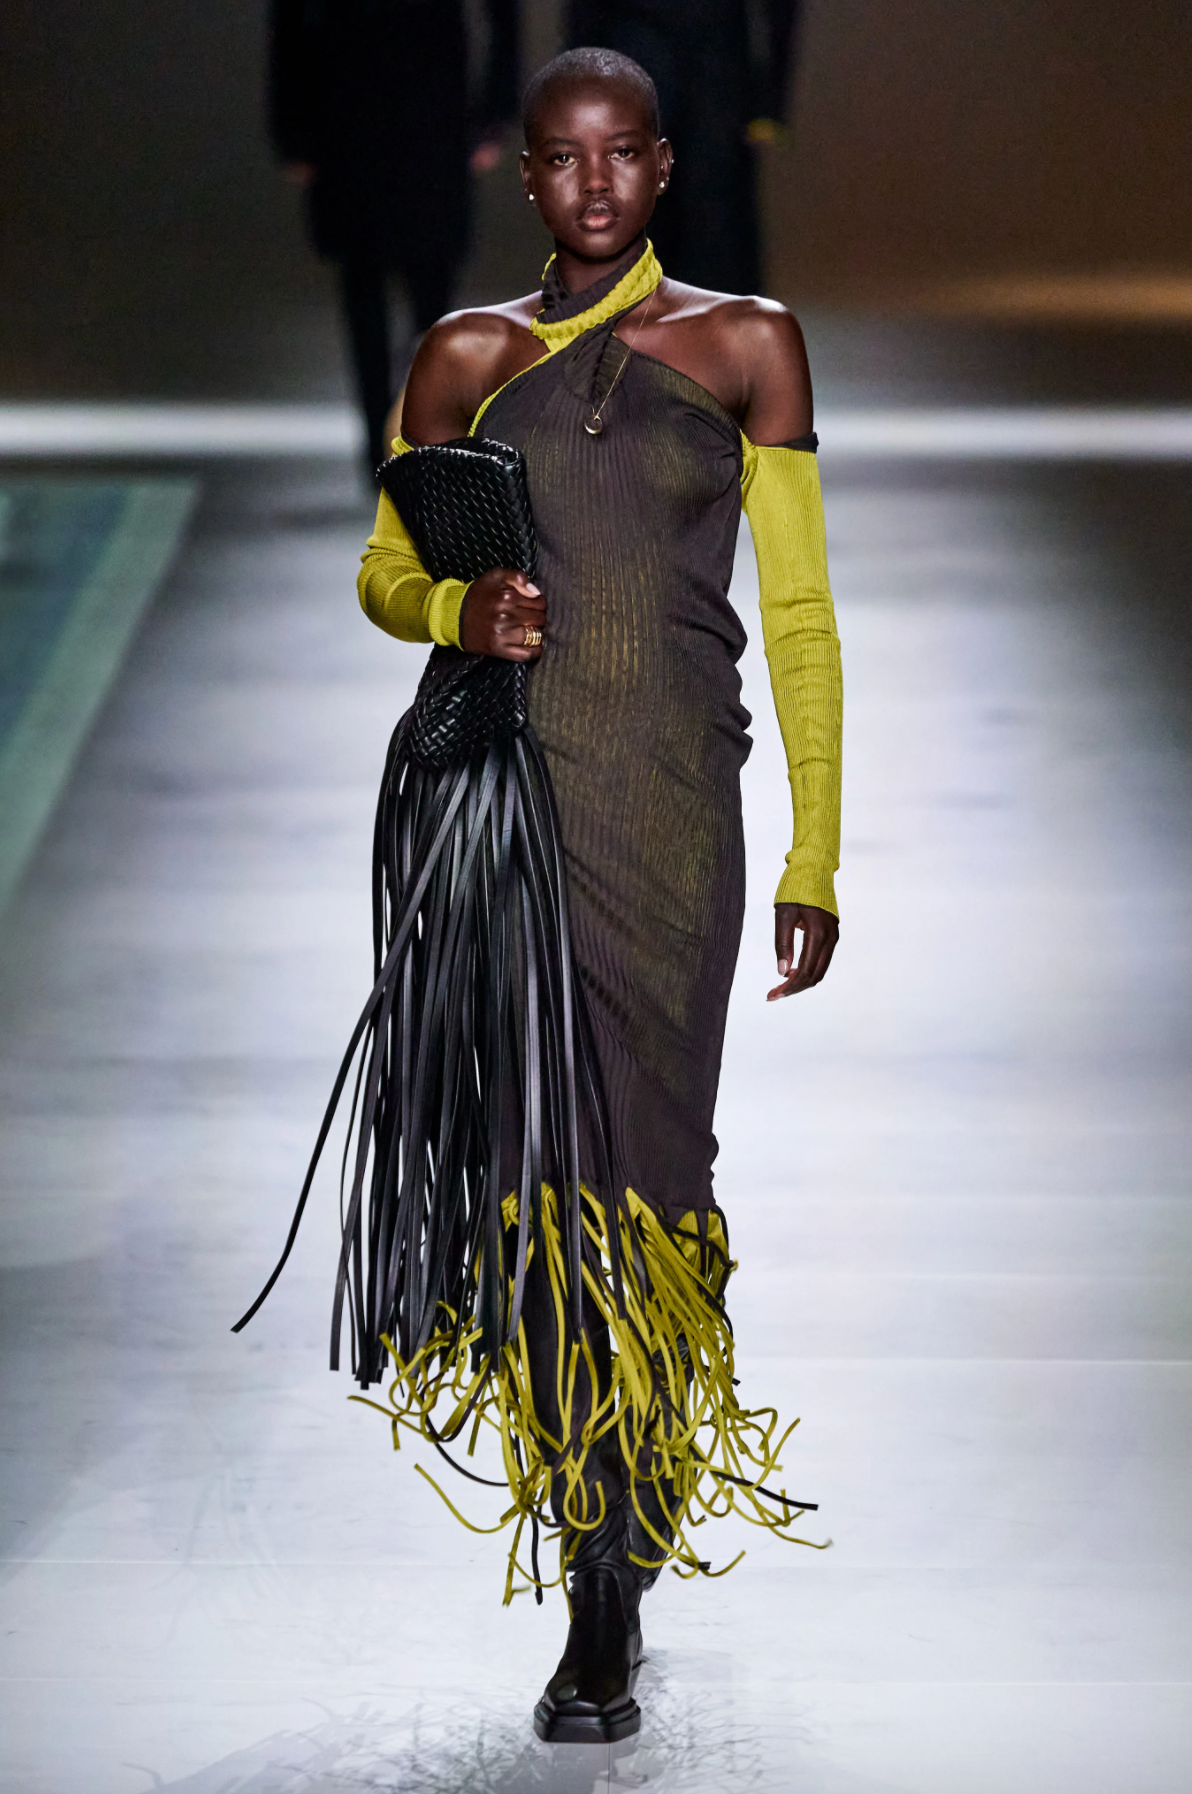  versace_lime_green_dress,fw_2020_trends,green_tassel_coat,designer_dress_bright_green,accouter_group_of_companies,my_home_trend,interior_designer_middle_east,luxury_design,luxury_living,award_winning_interior_design,luxury_interiors_international,sa